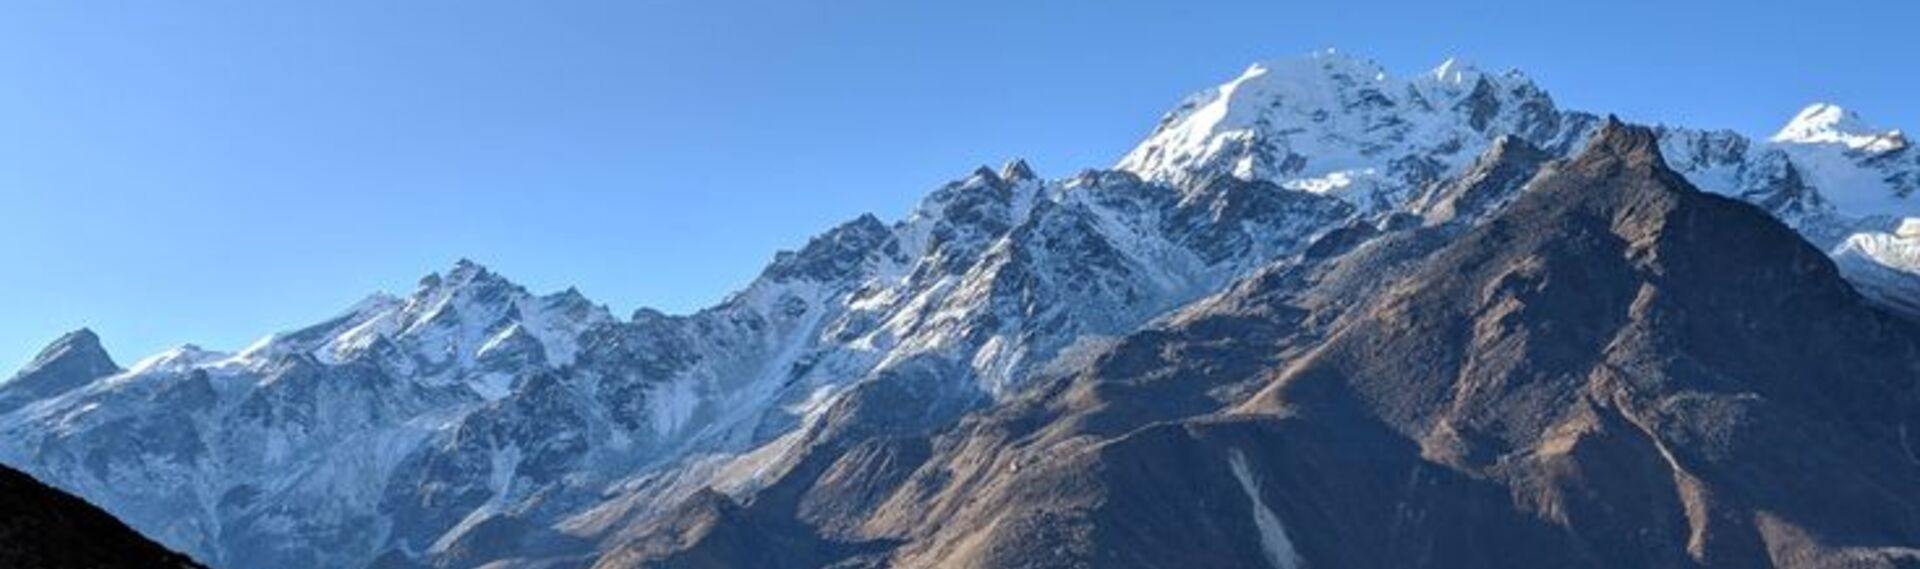 Where Is Langtang National Park Located?